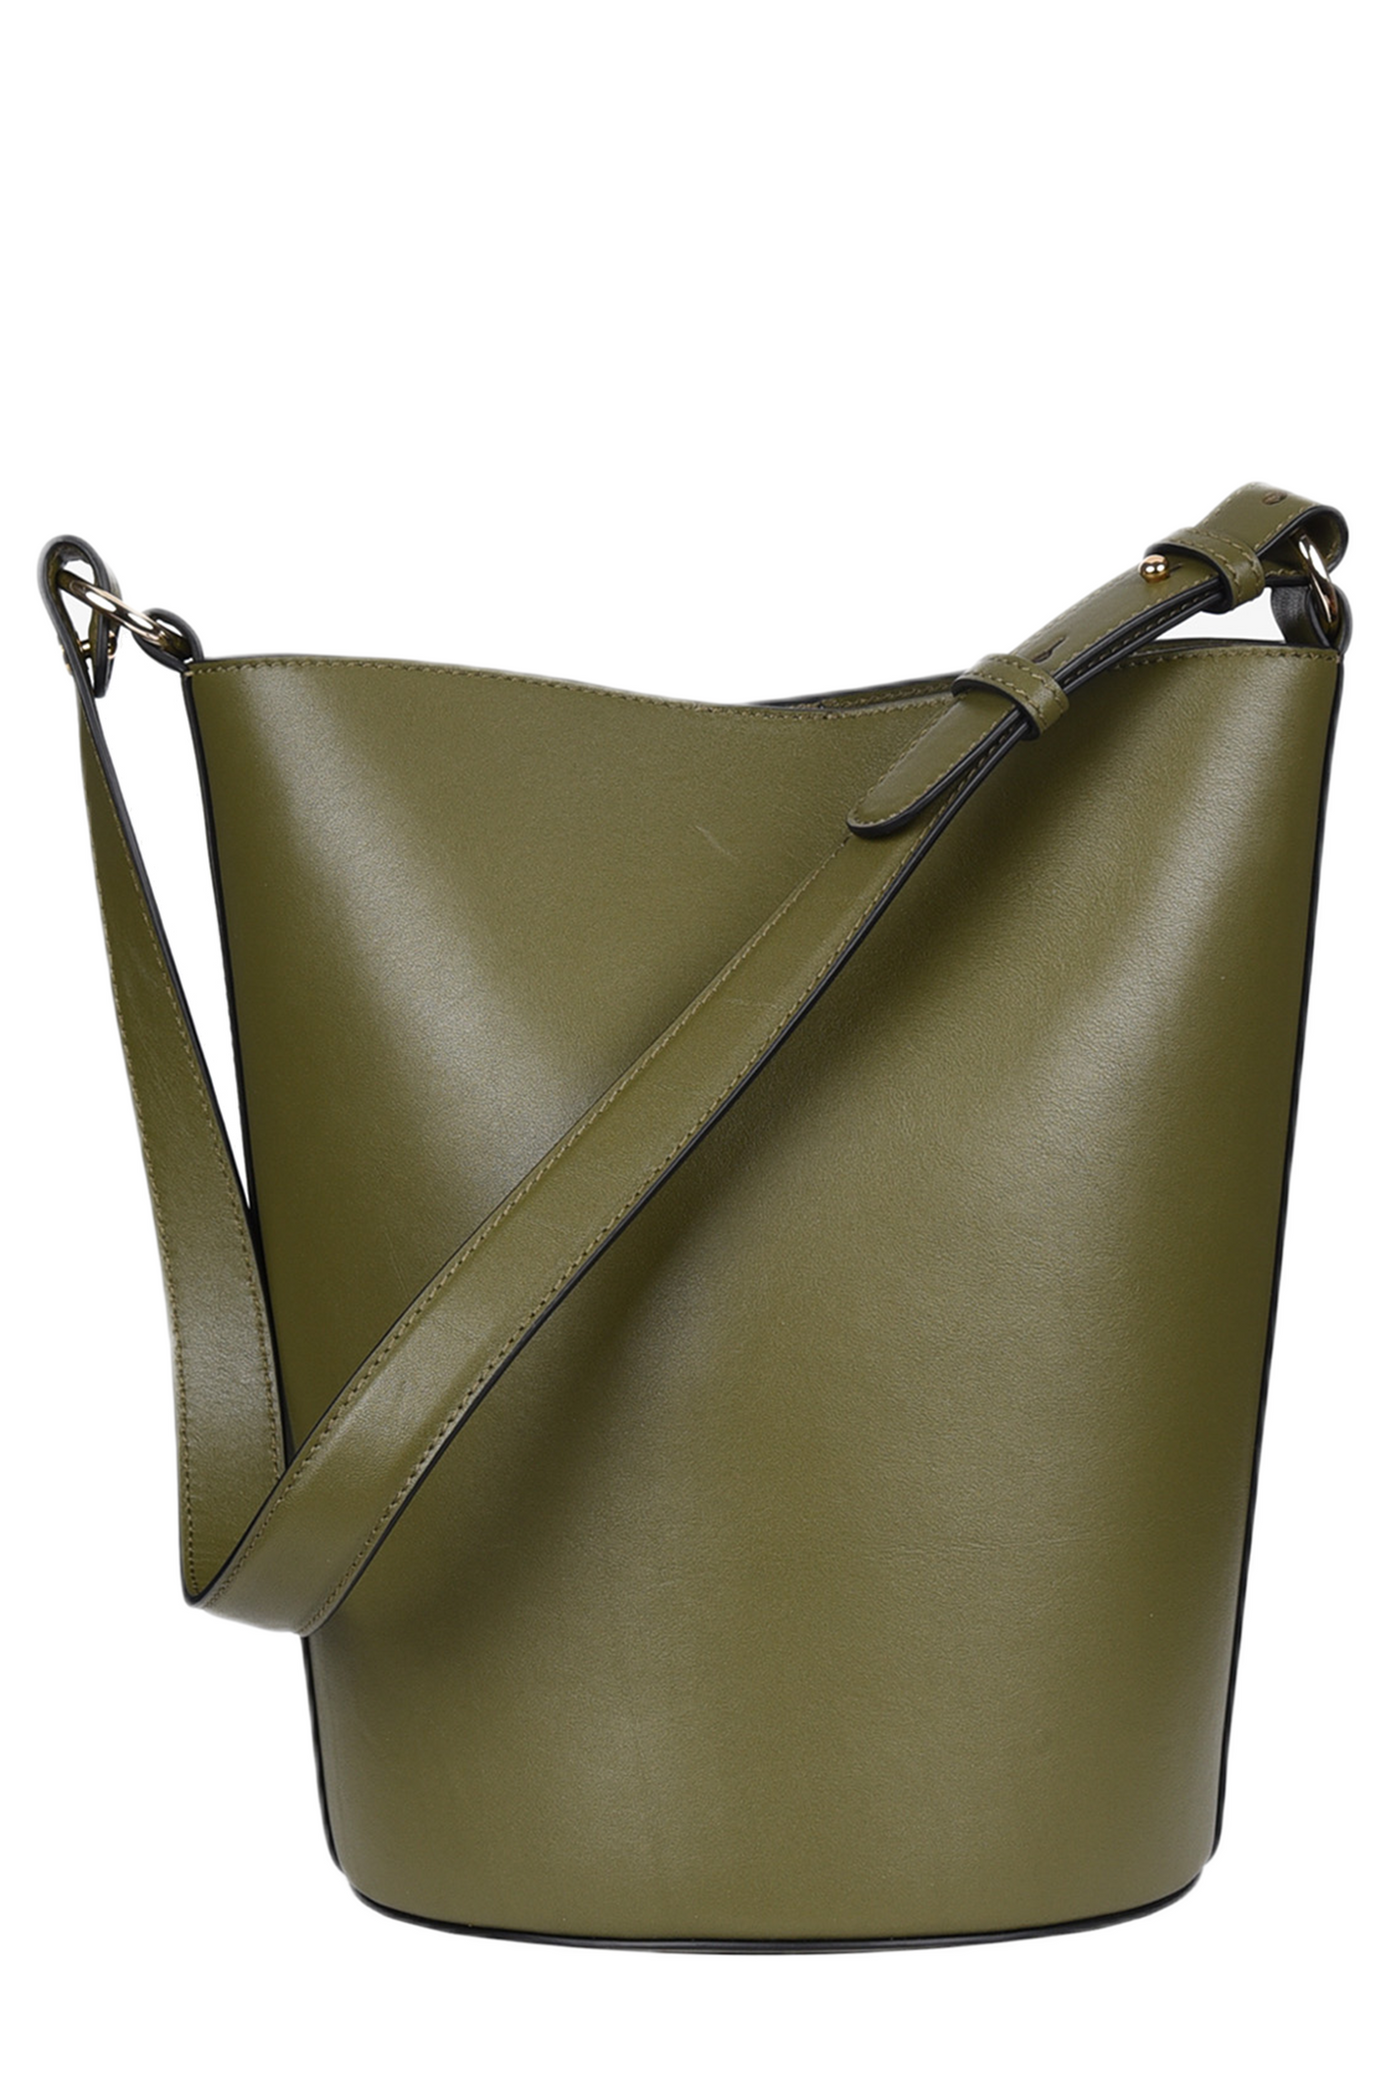 HYER GOODS: LUXE CONVERTIBLE BUCKET BAG WITH REMOVABLE SHOULDER + CROSSBODY STRAPS